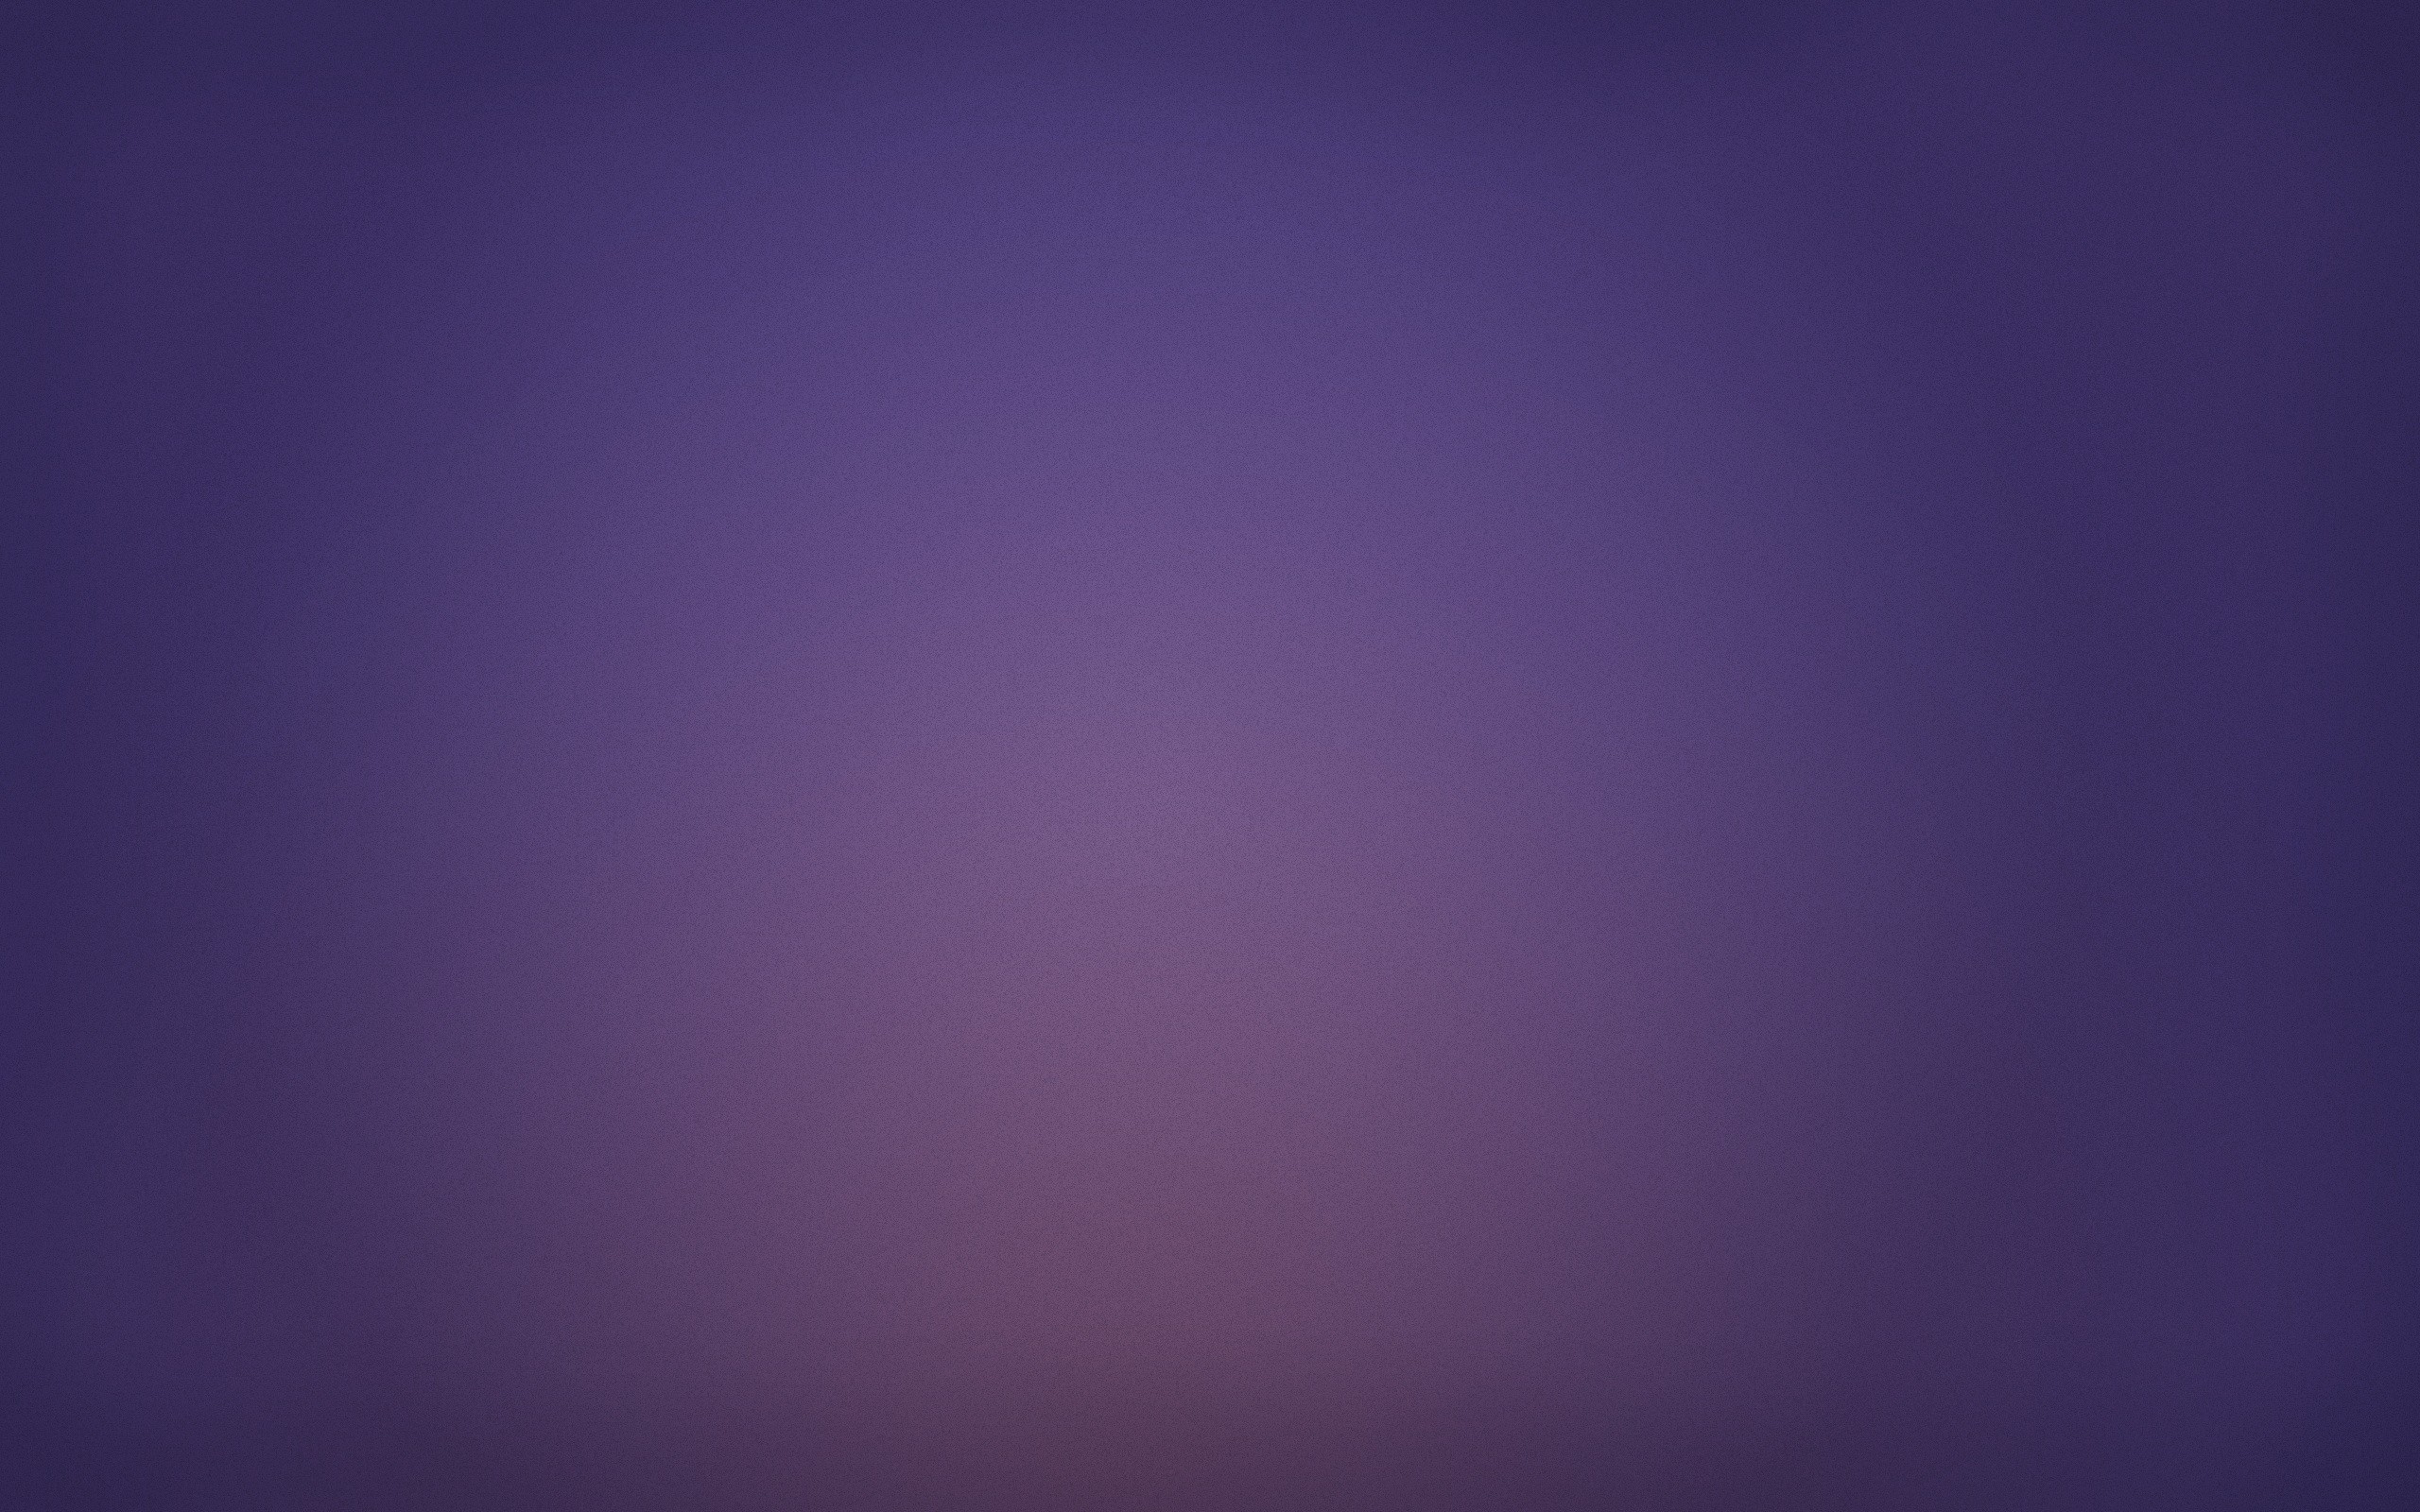 2560x1600 zip file for get full 15+ Flat Design HD Wallpapers for Windows .